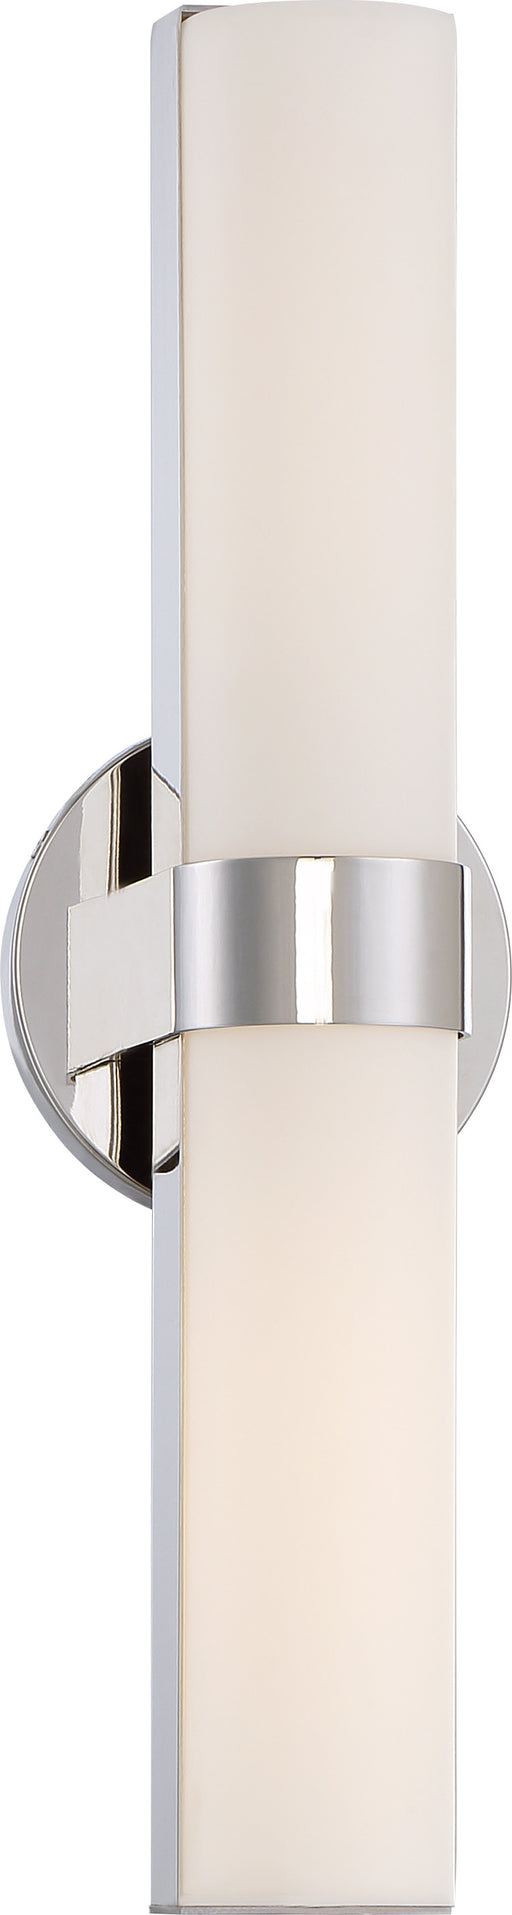 SATCO/NUVO Bond Double 17-1/2 Inch LED Vanity With White Acrylic Lens (62-722)